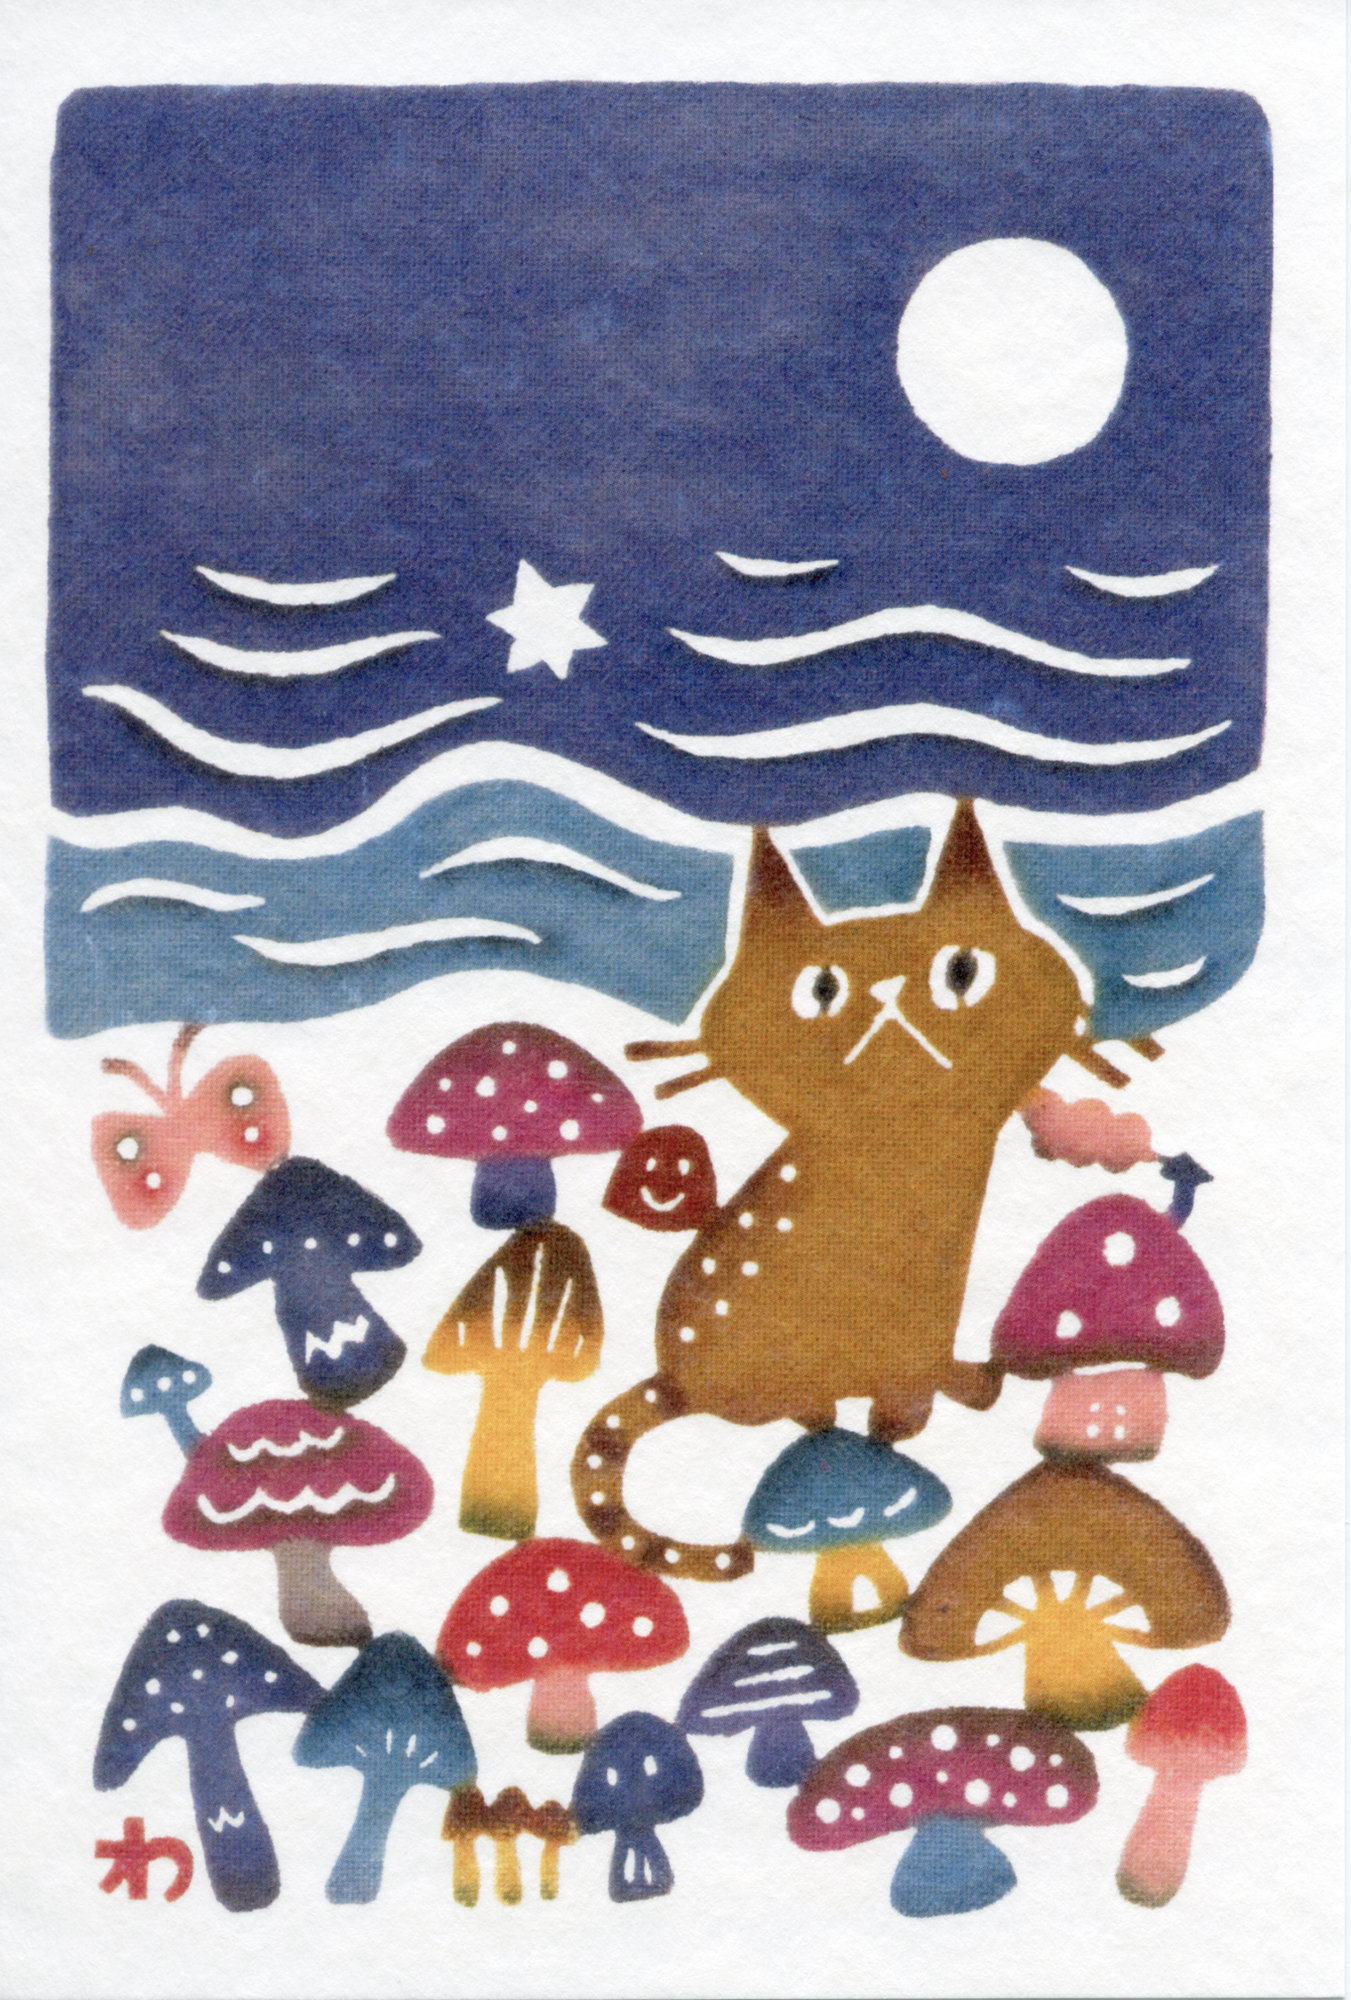 Read more about the article 「満月の夜のきのこパーティー」Mushroom Party on a Full Moon Night